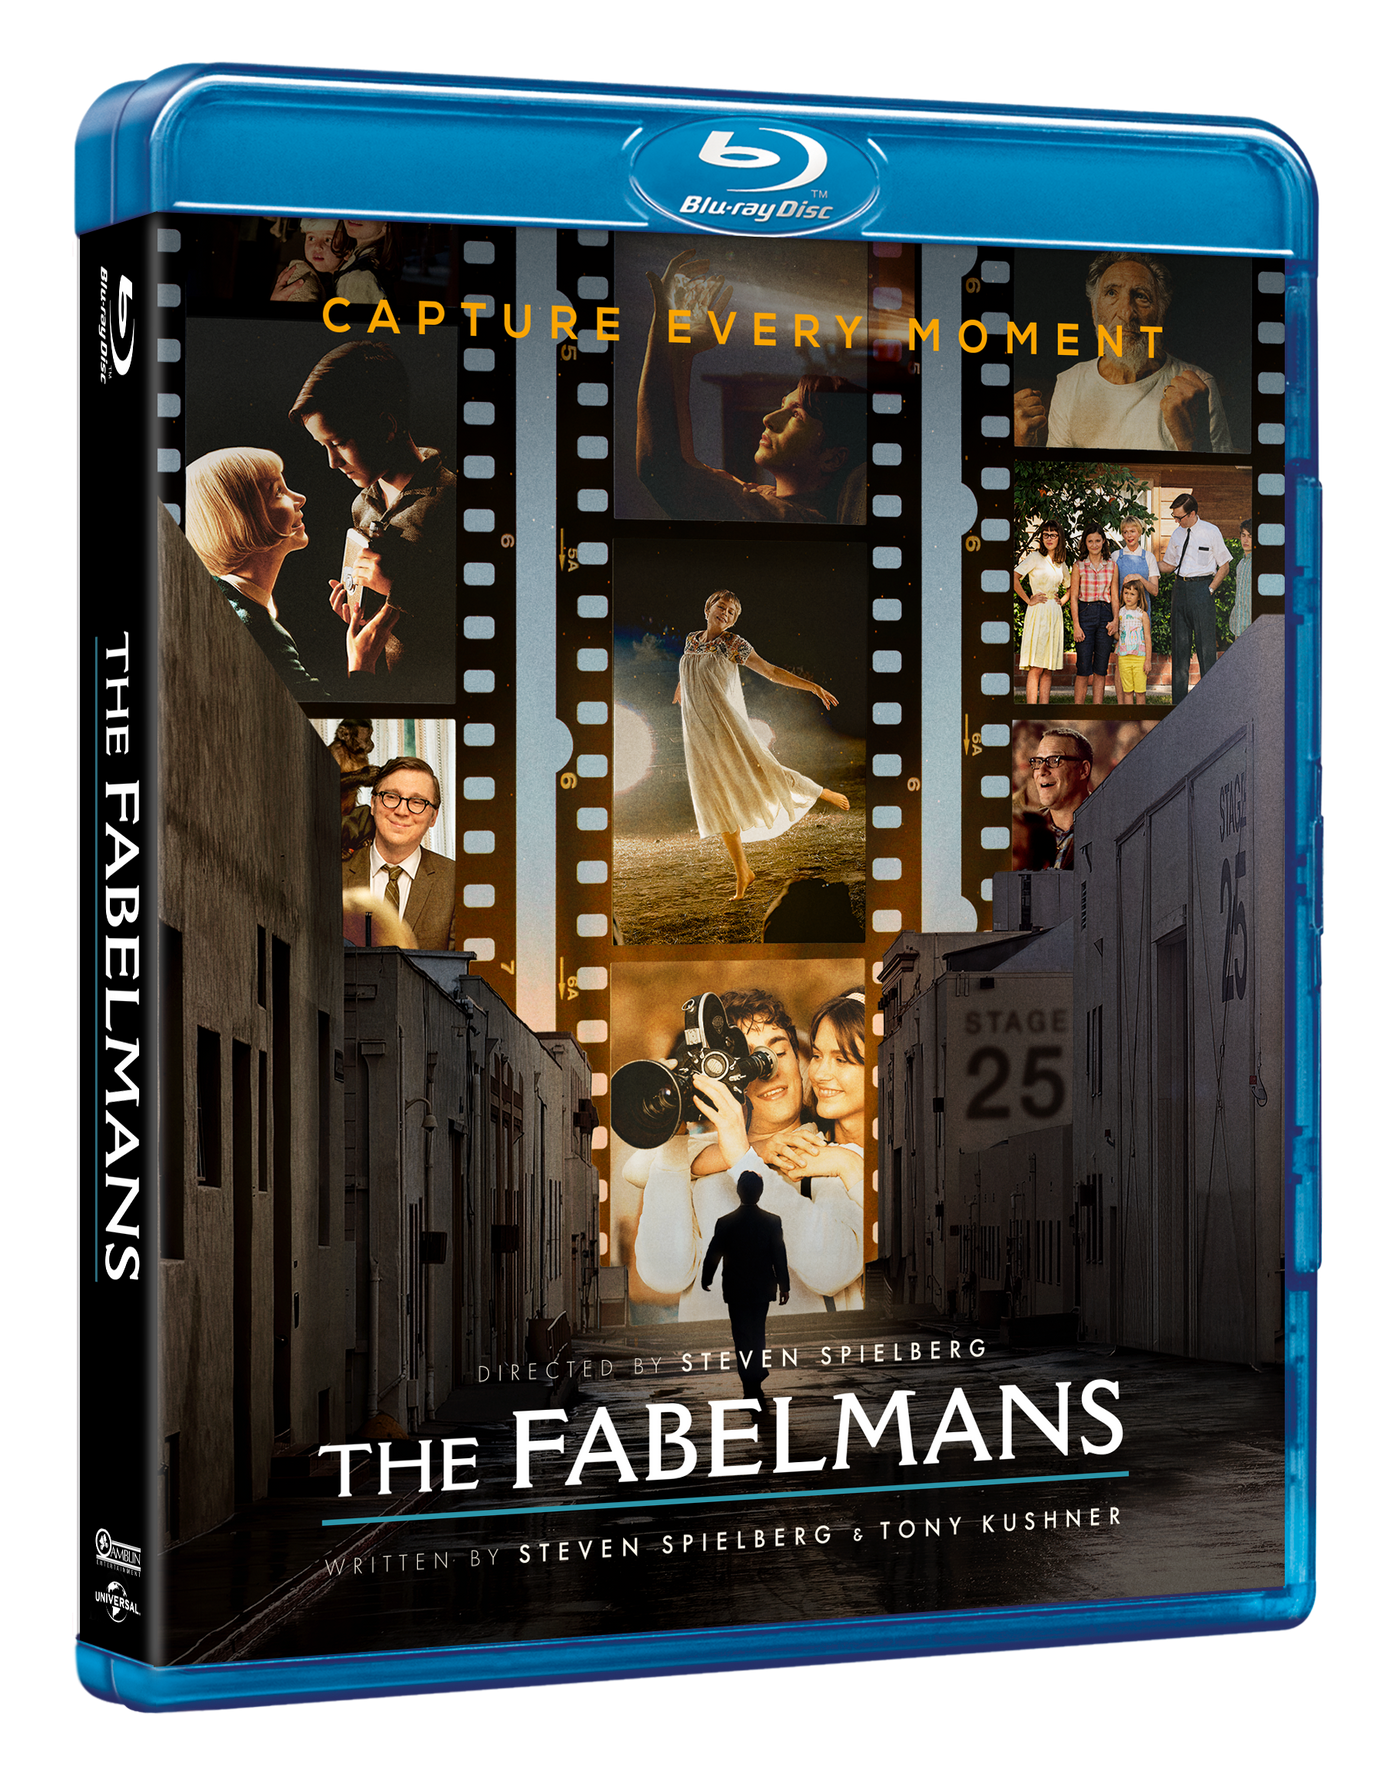 The Fabelmans [Blu-ray] [2022]